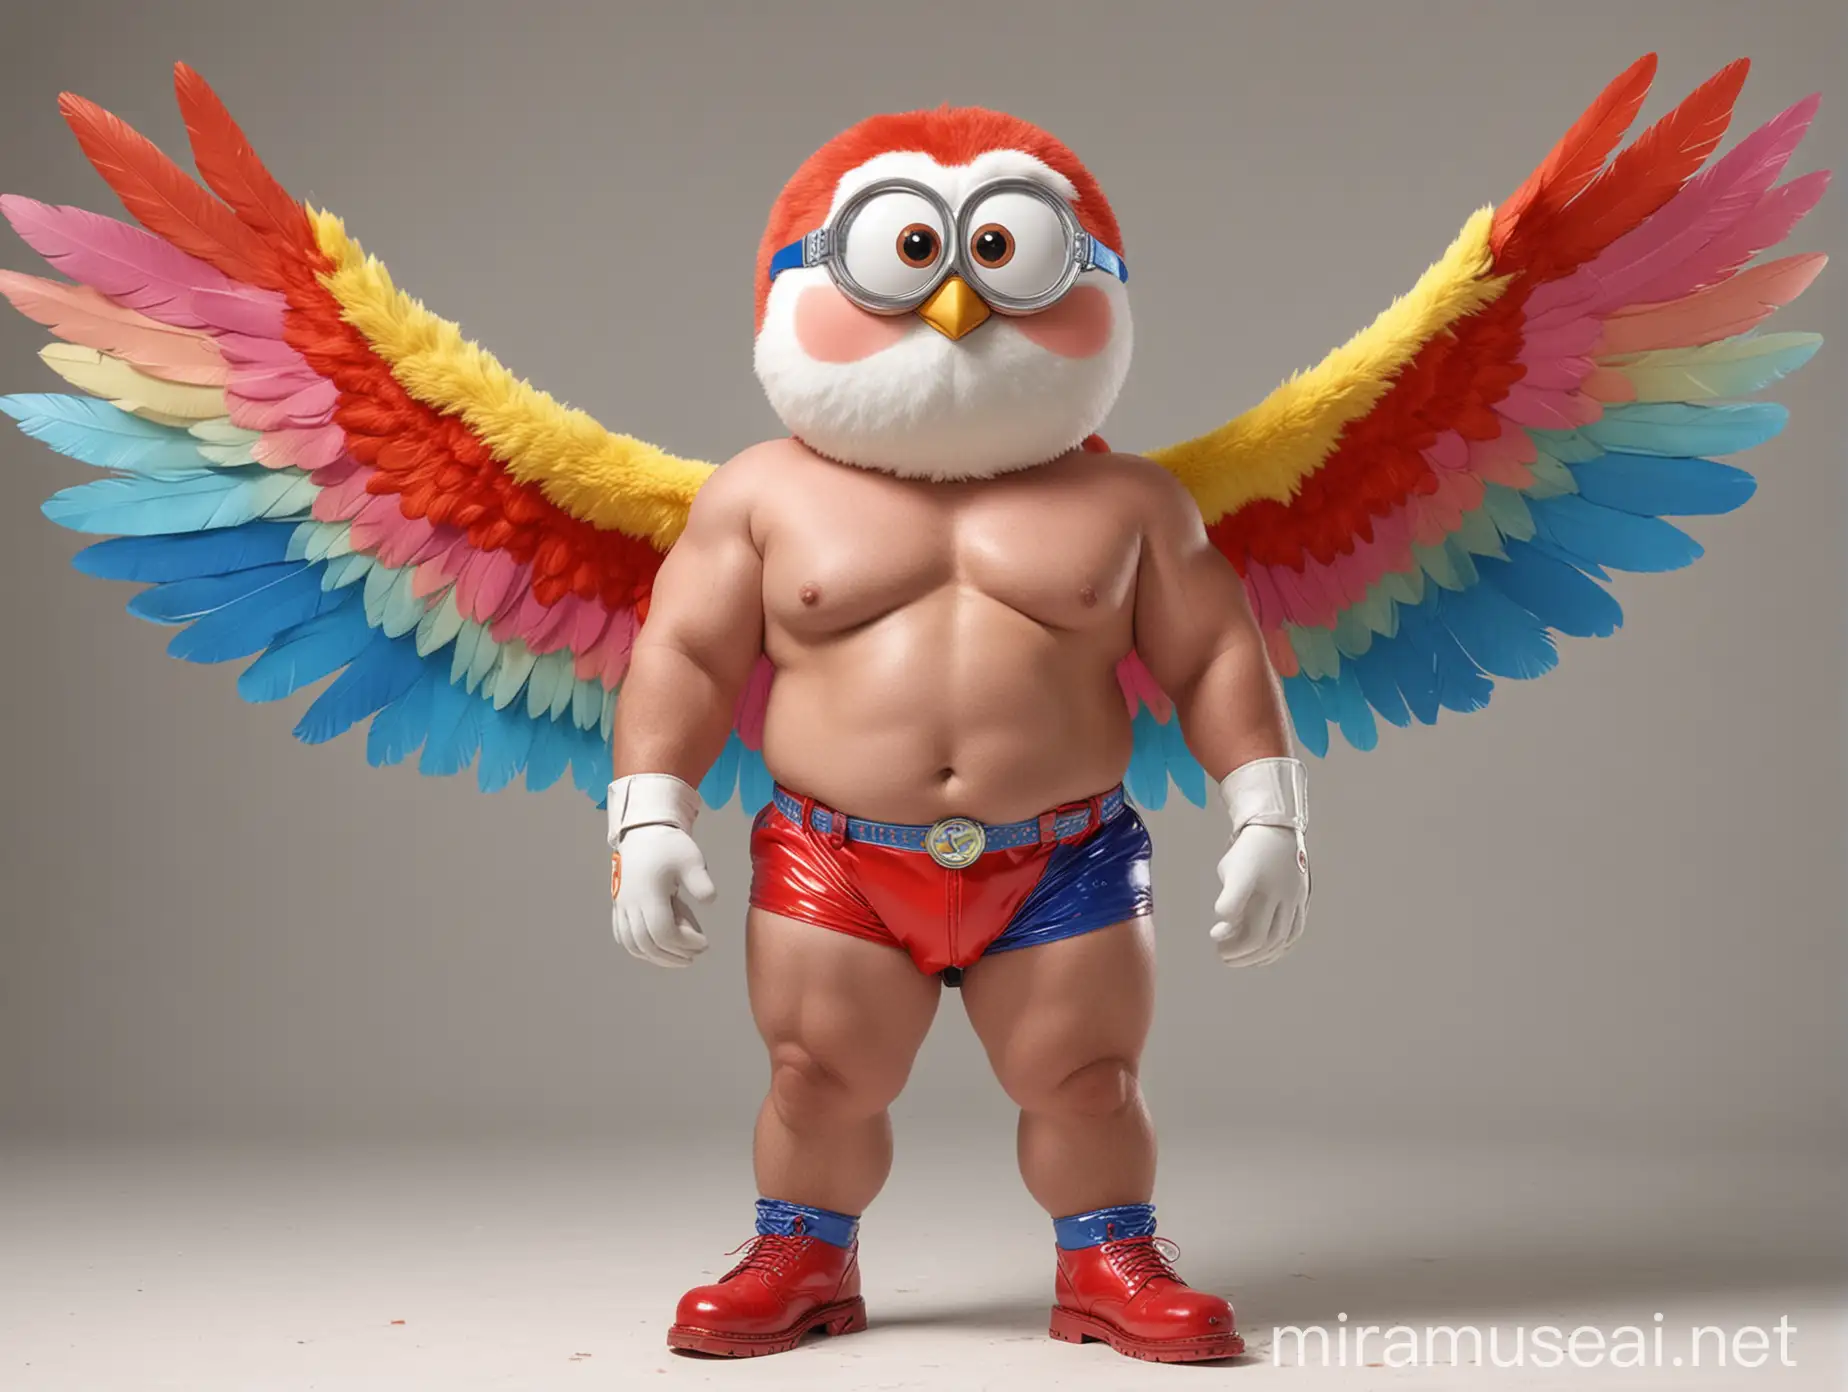 Smiling Topless 40s Bodybuilder Flexing with Rainbow Eagle Wings Jacket